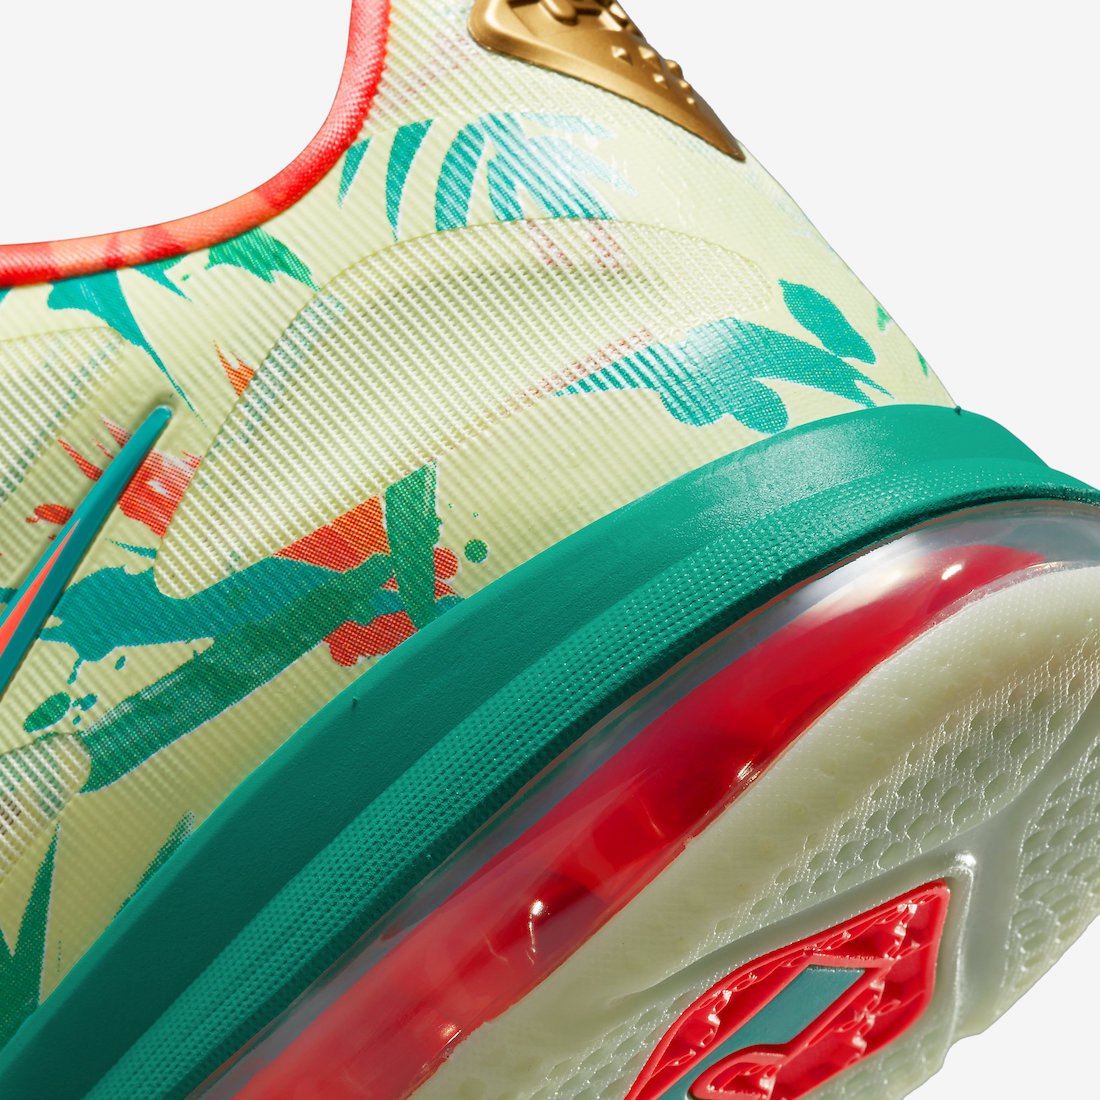 Nike LeBron 9 Low LeBronold Palmer DO9355-300 Release Date